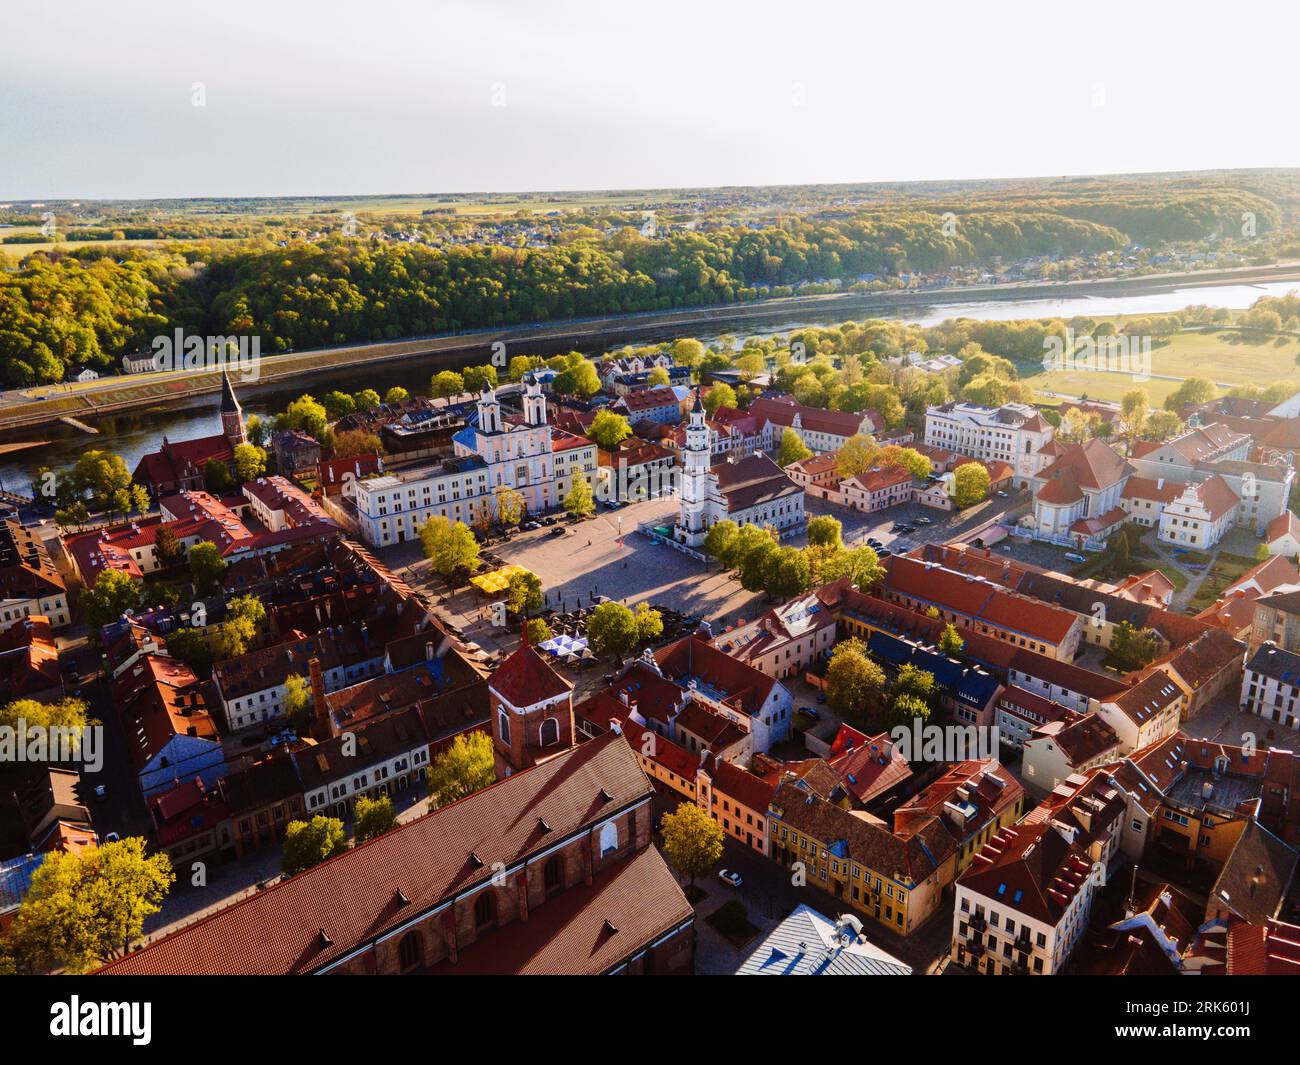 Aerial view of Kaunas Old Town, Lithuania, a historic district with beautiful buildings, streets, and attractions Stock Photo